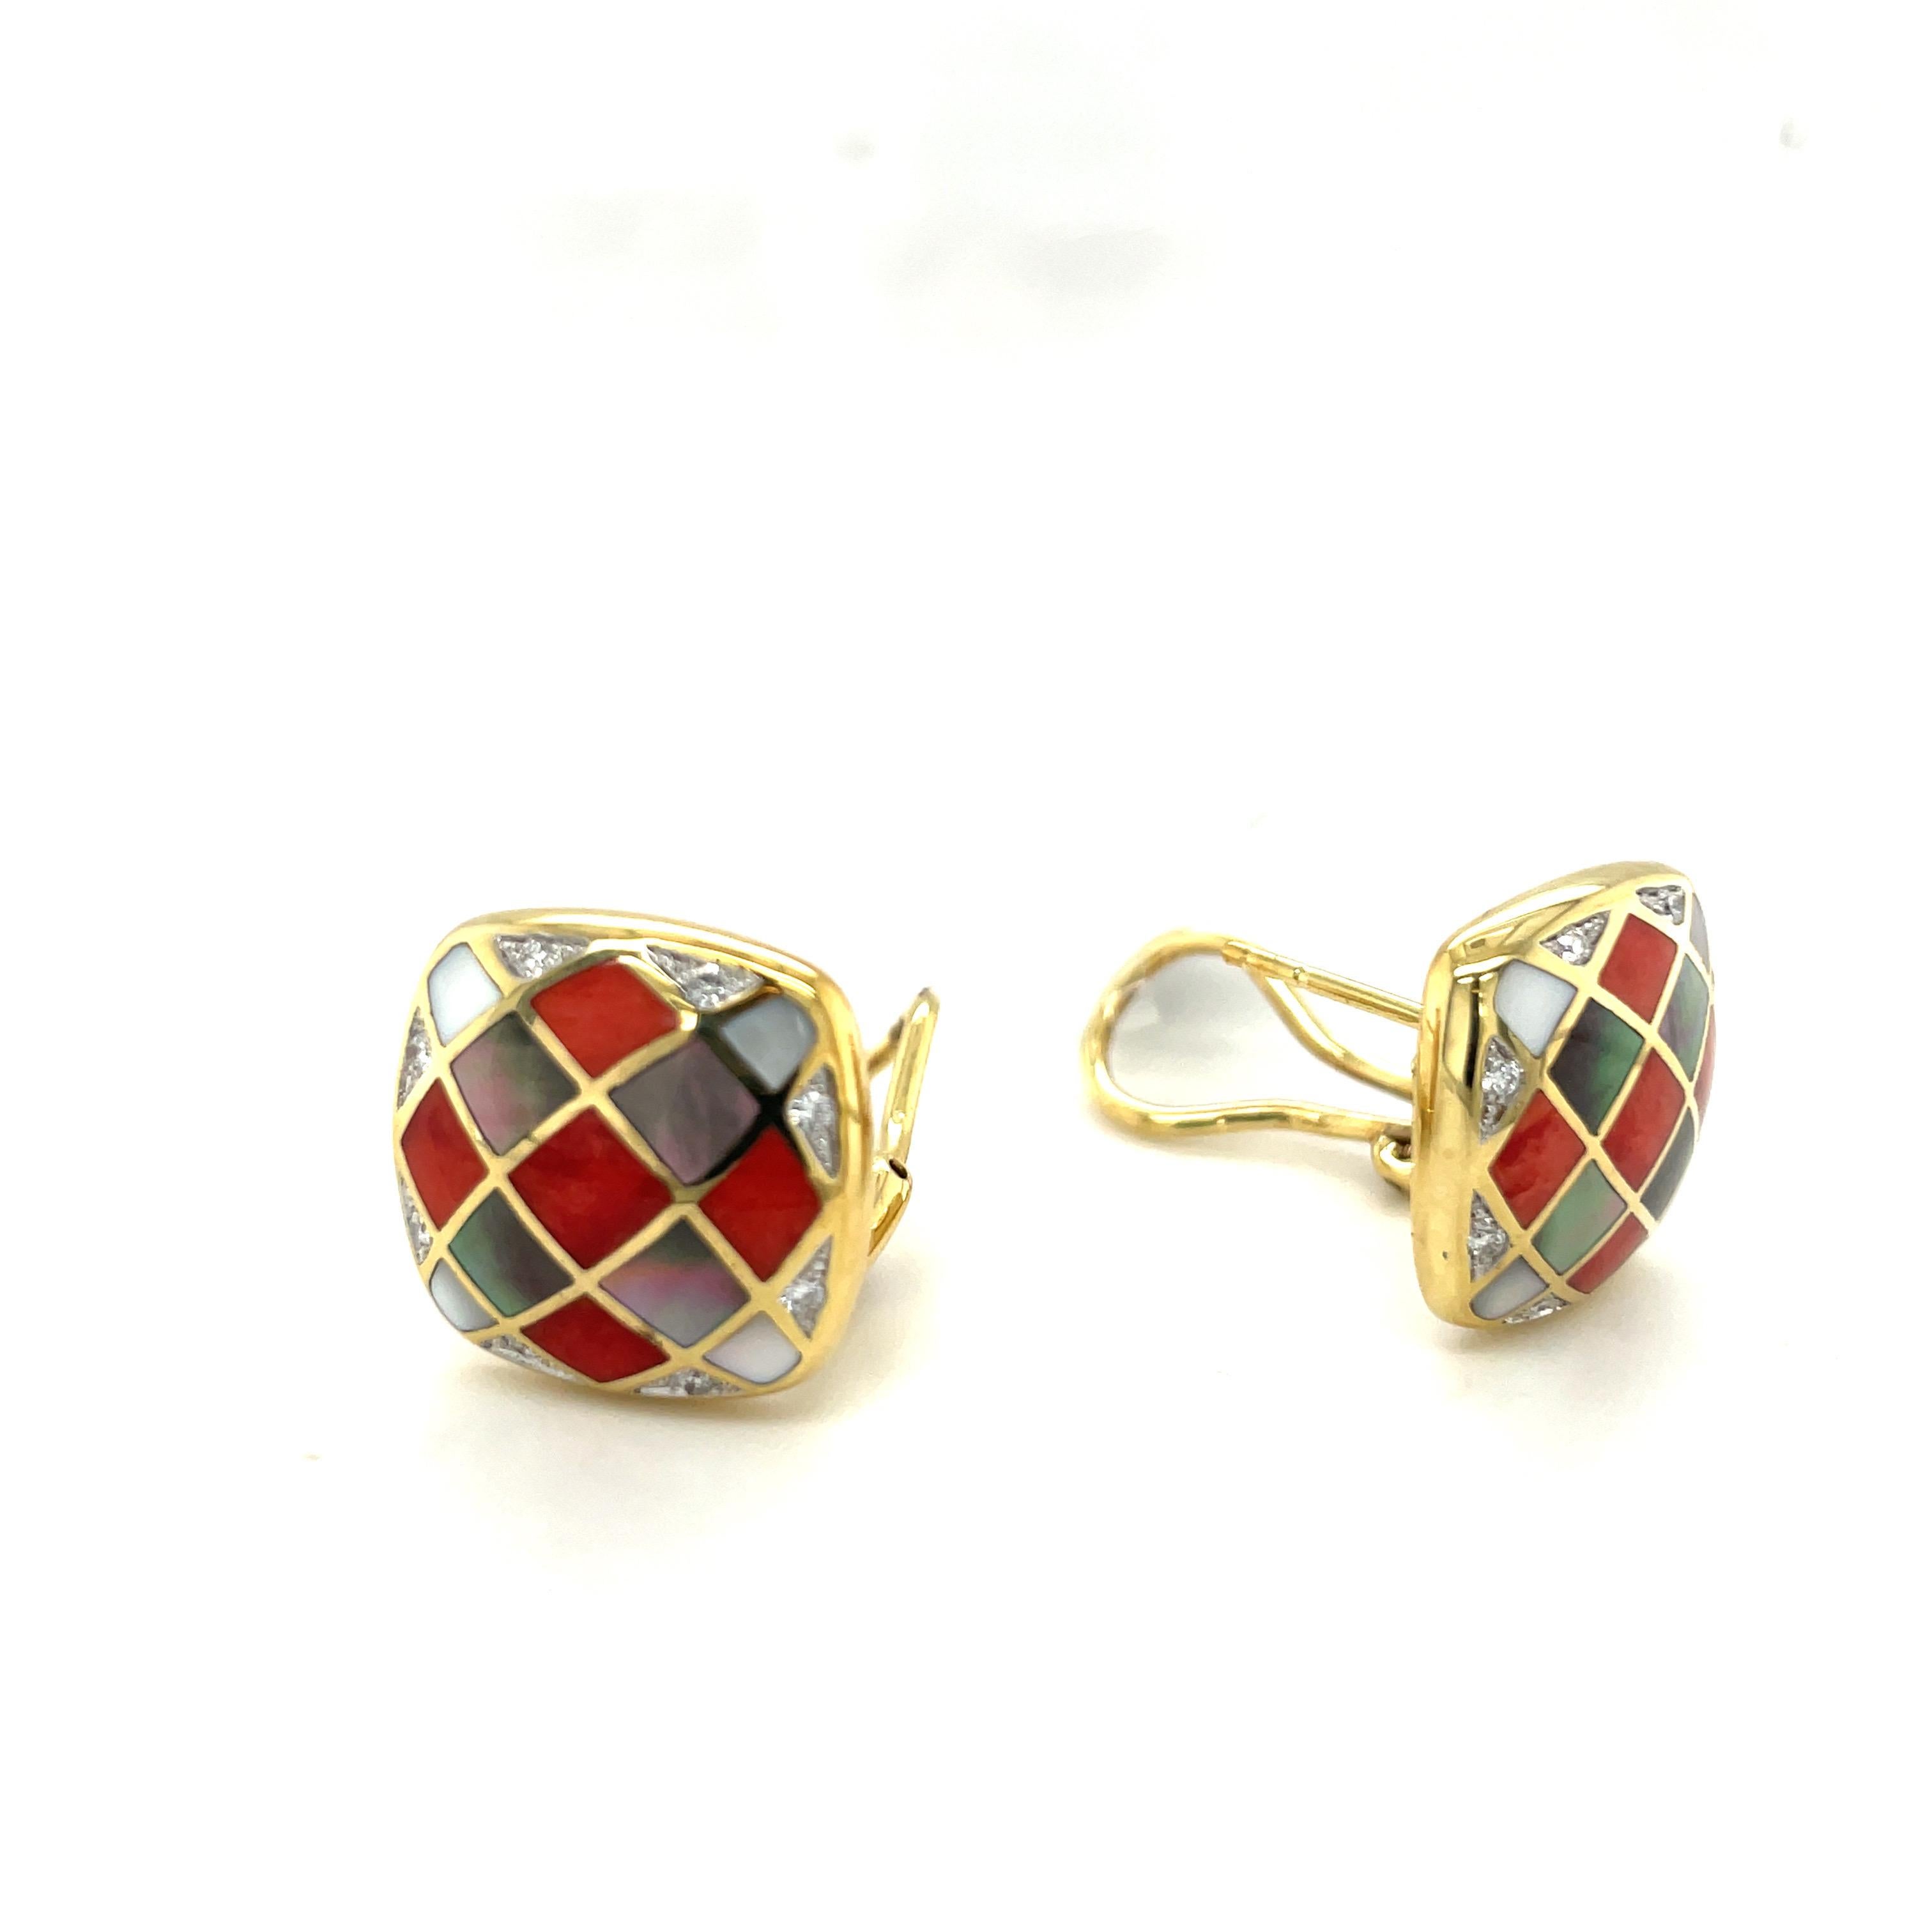 Gorgeous earrings for the coral lover. These 18 karat yellow gold cushion shaped earrings are set with a checkerboard pattern of inlaid coral and mother of pearl. Two shades of mother of pearl, white and grey give a lovely contrast to this very